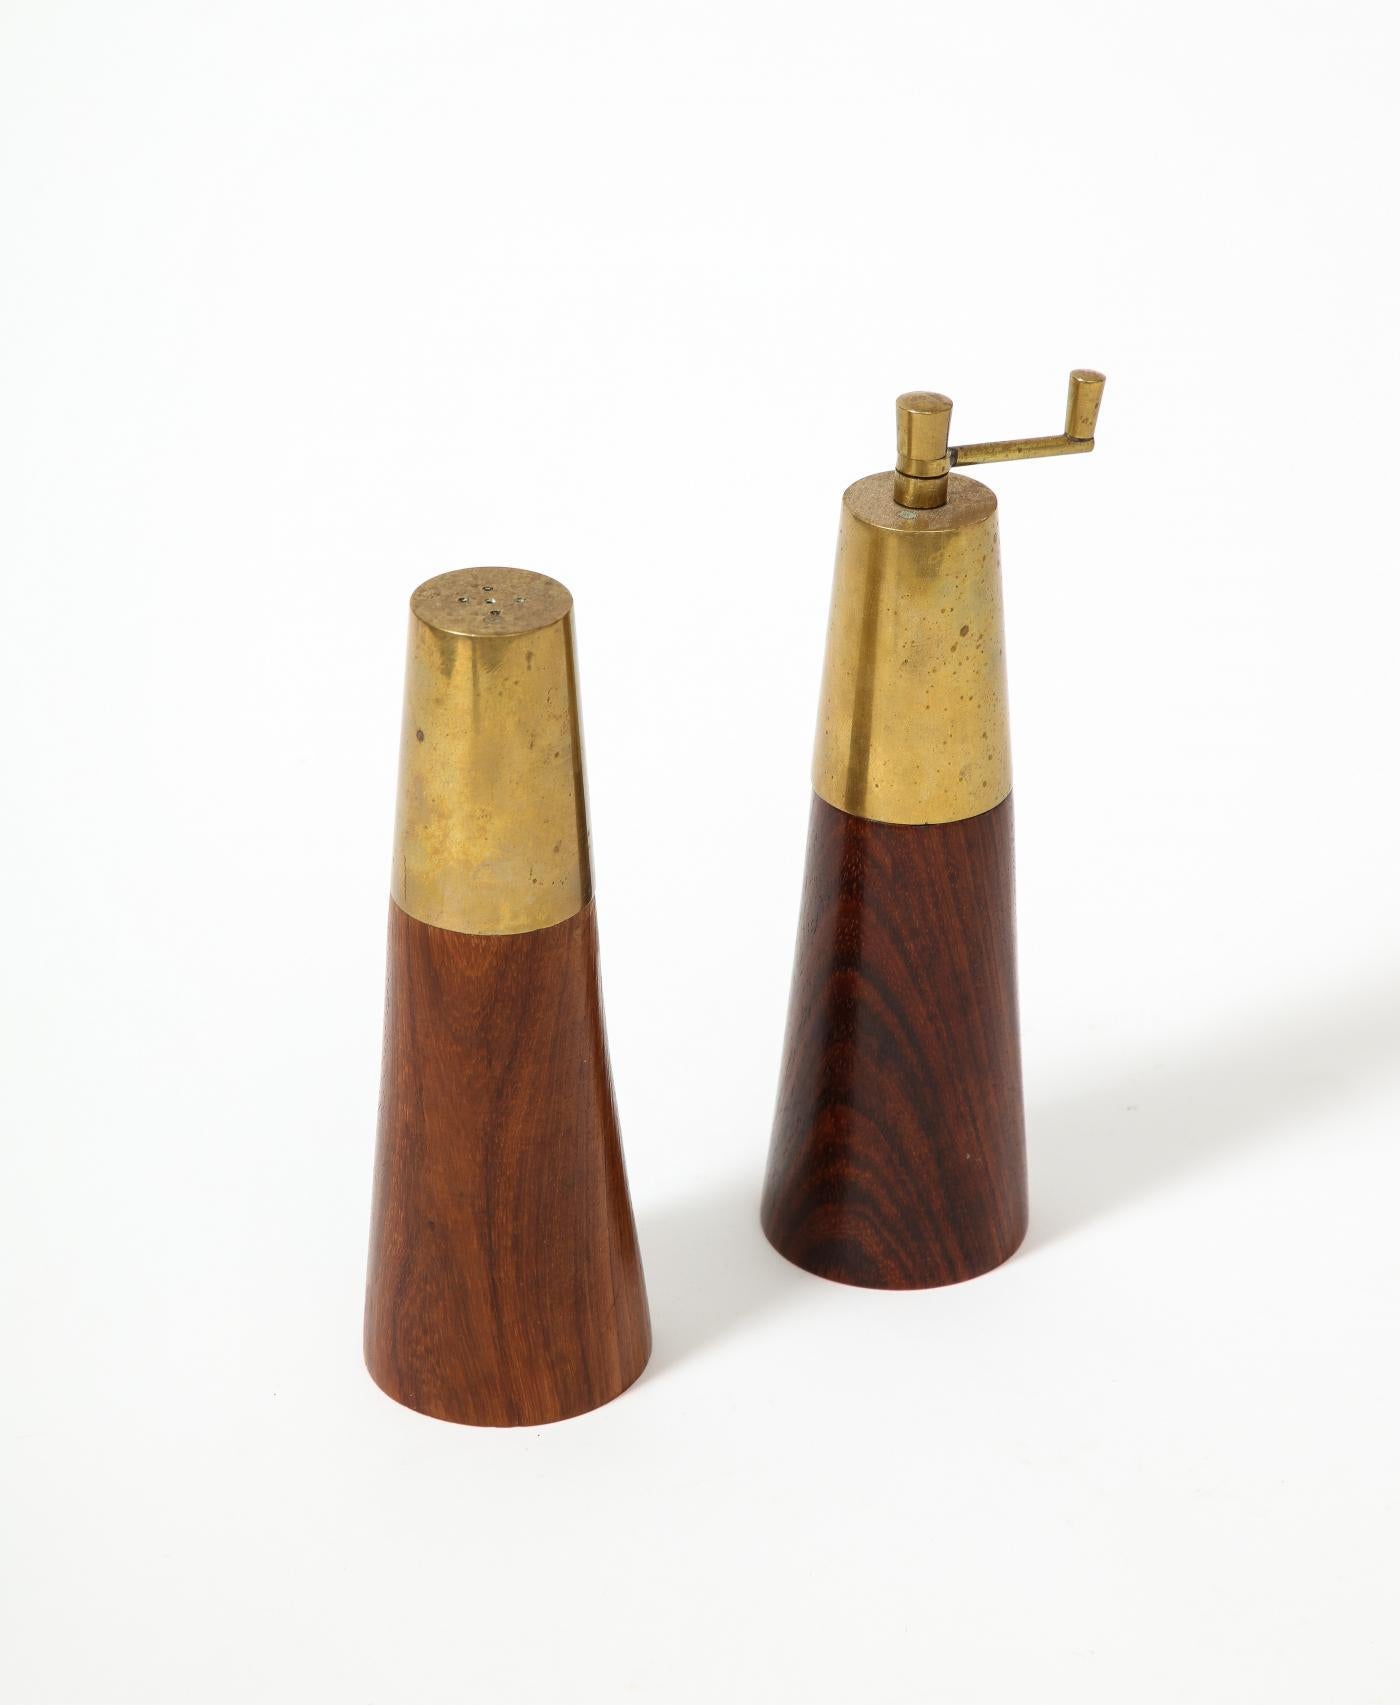 Rosewood and Brass salt Shaker and Pepper Mill, Italy

